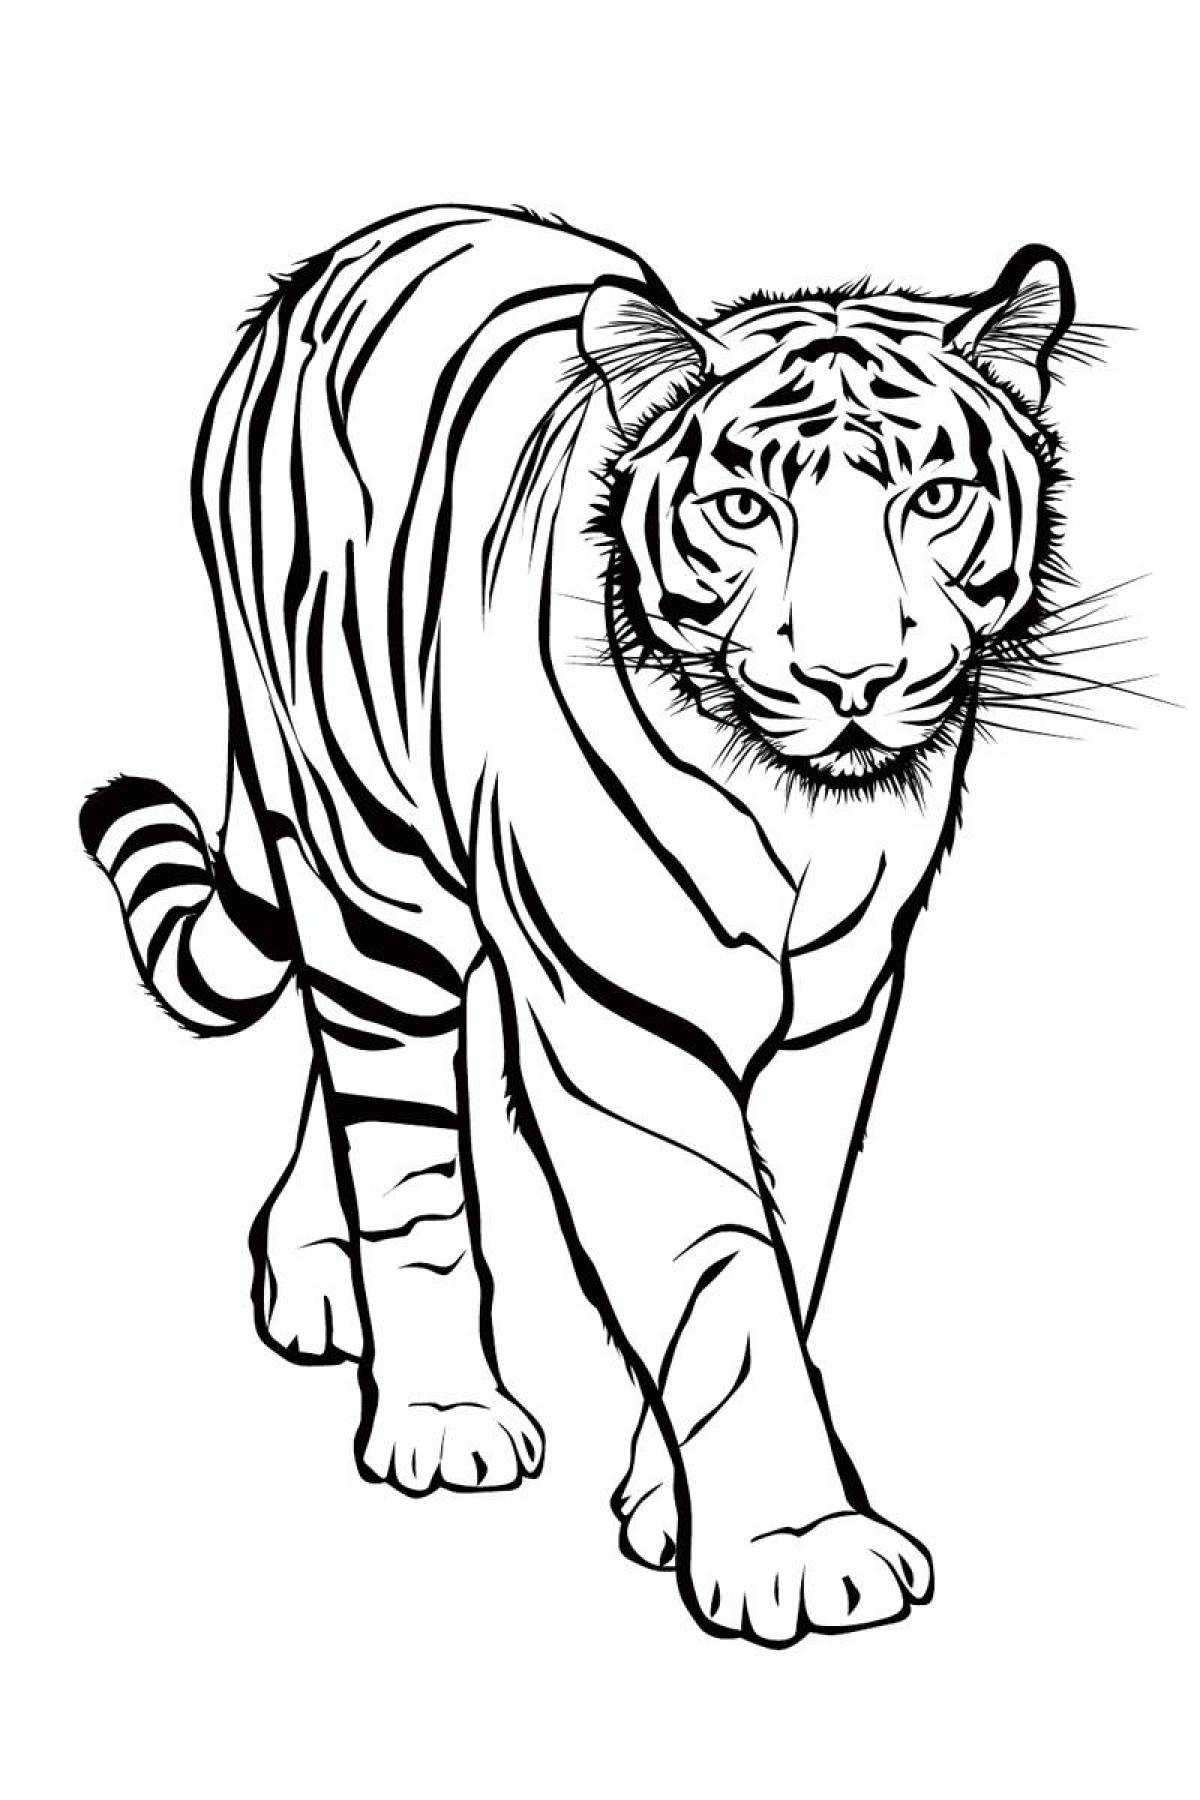 Tiger plush coloring book for kids